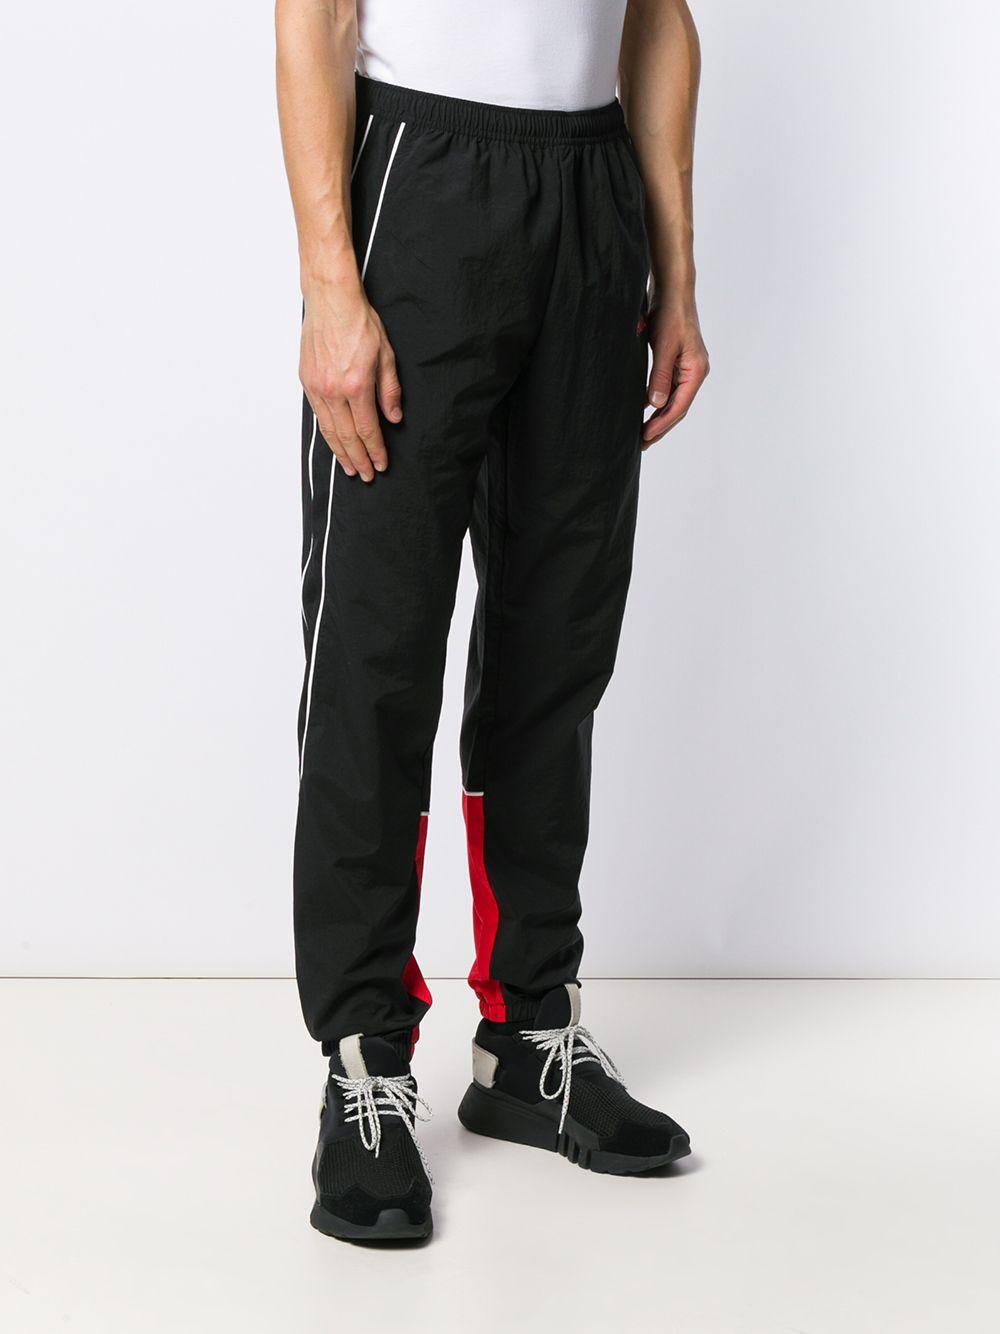 Karl Lagerfeld Synthetic X Puma Track Pants in Black for Men - Lyst